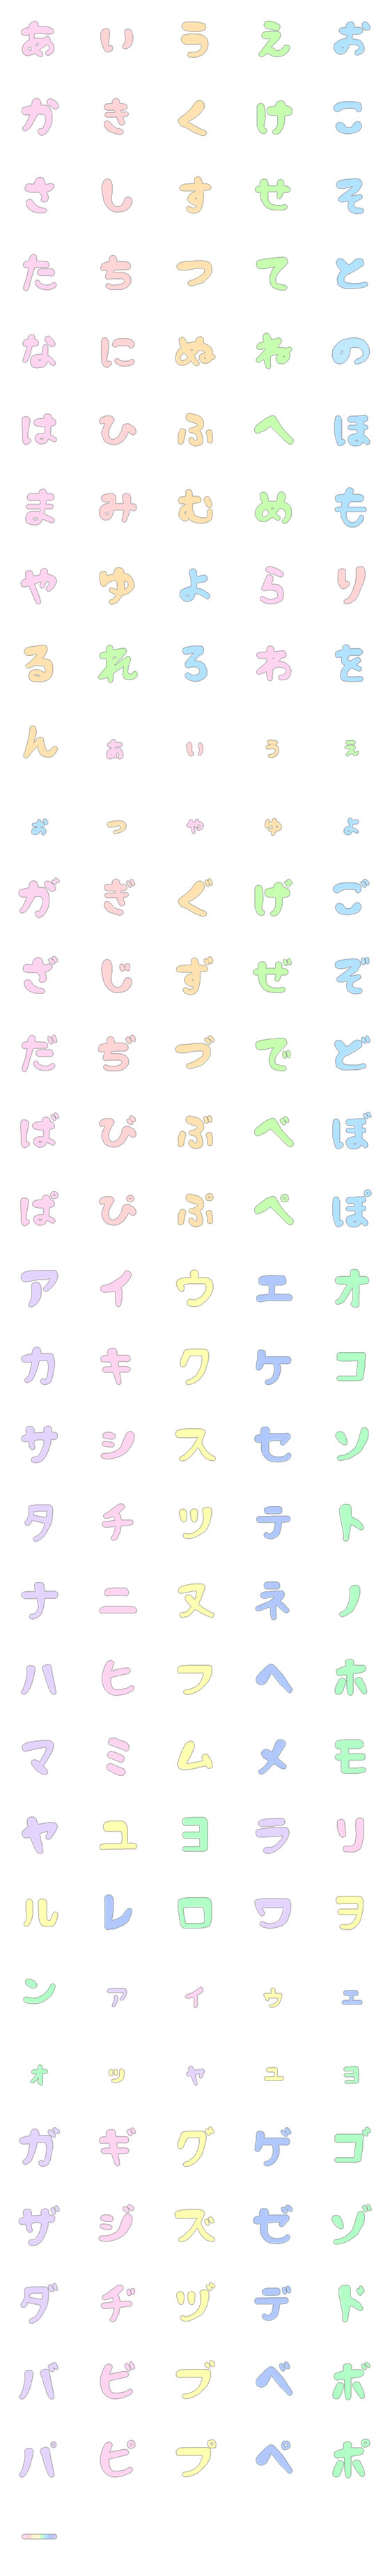 [LINE絵文字]パステルふわテカ文字の画像一覧